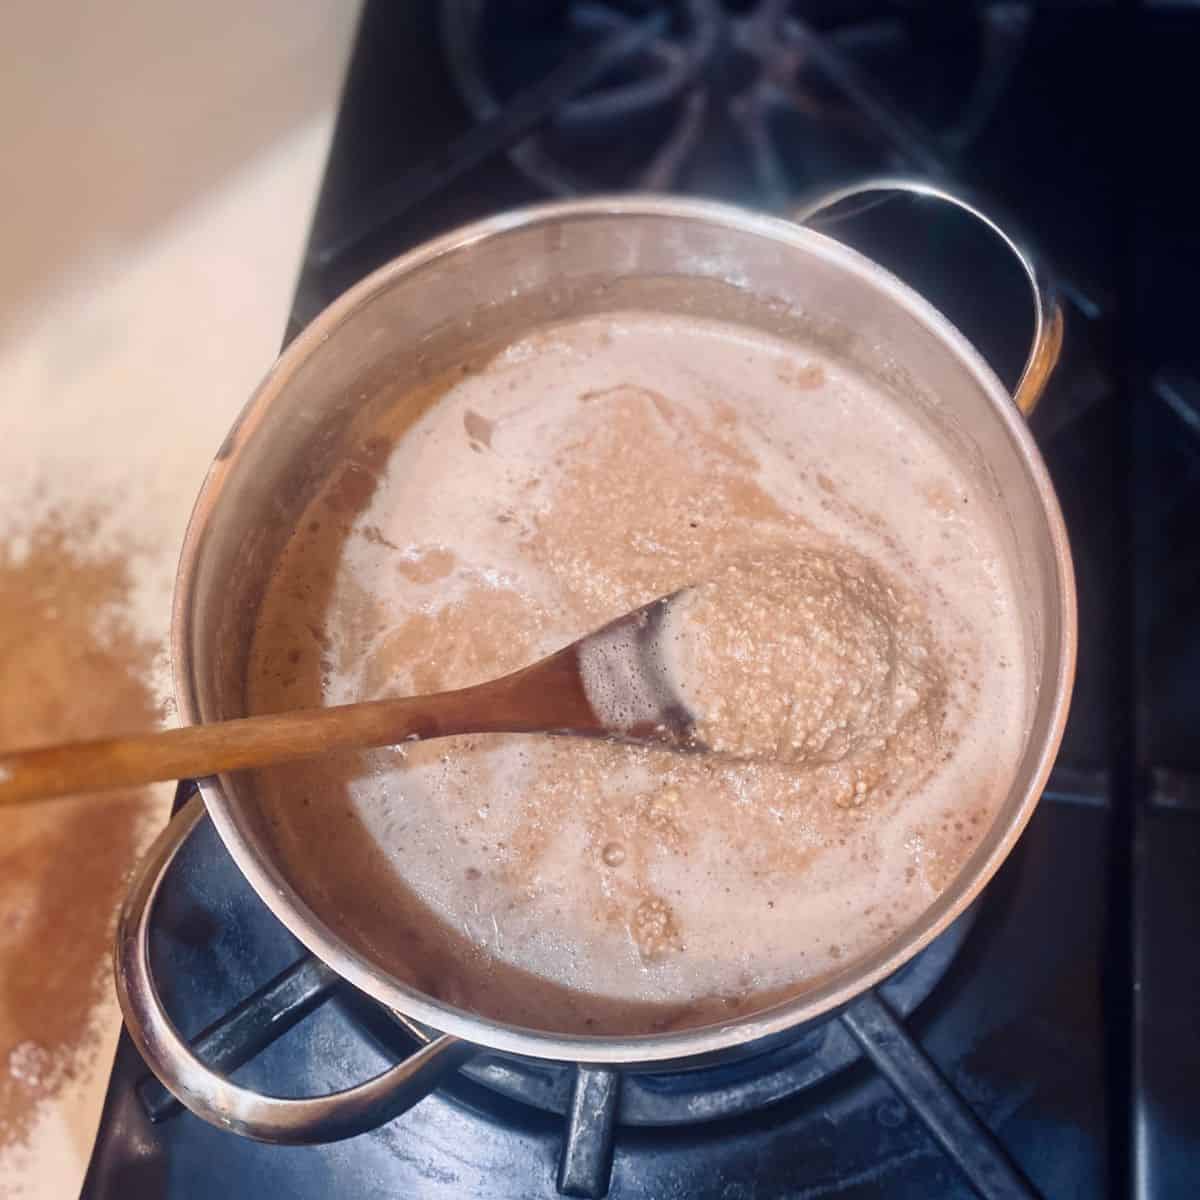 Cook the buckwheat porridge mixture in a pot, stirring frequently, until it thickens. 